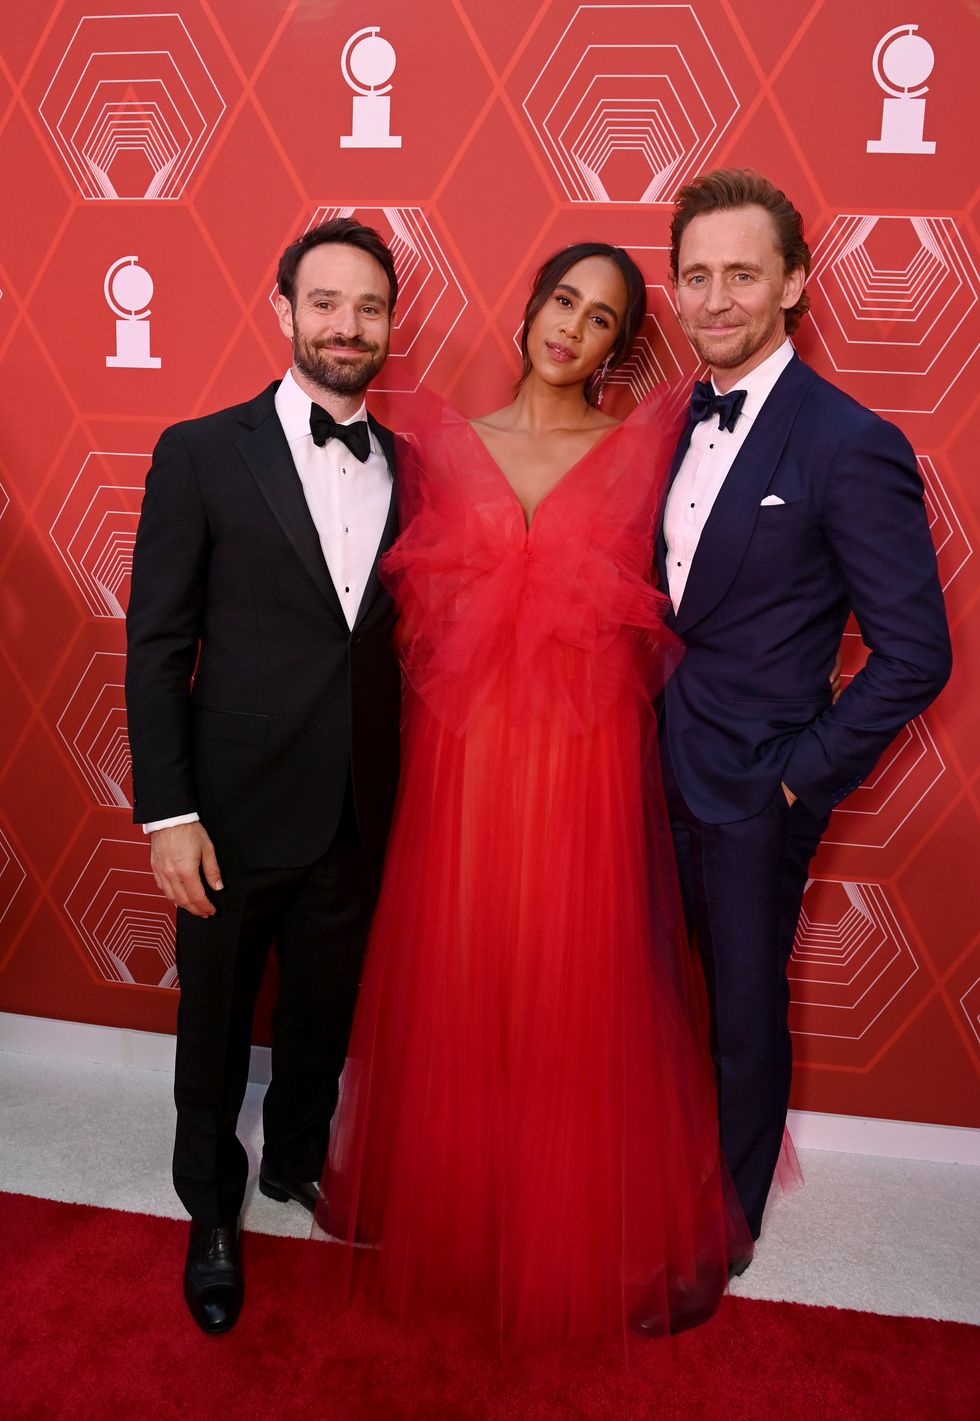 new york, new york   september 26 l r charlie cox, zawe ashton and tom hiddleston attend the 74th annual tony awards at winter garden theater on september 26, 2021 in new york city photo by bryan beddergetty images for tony awards productions